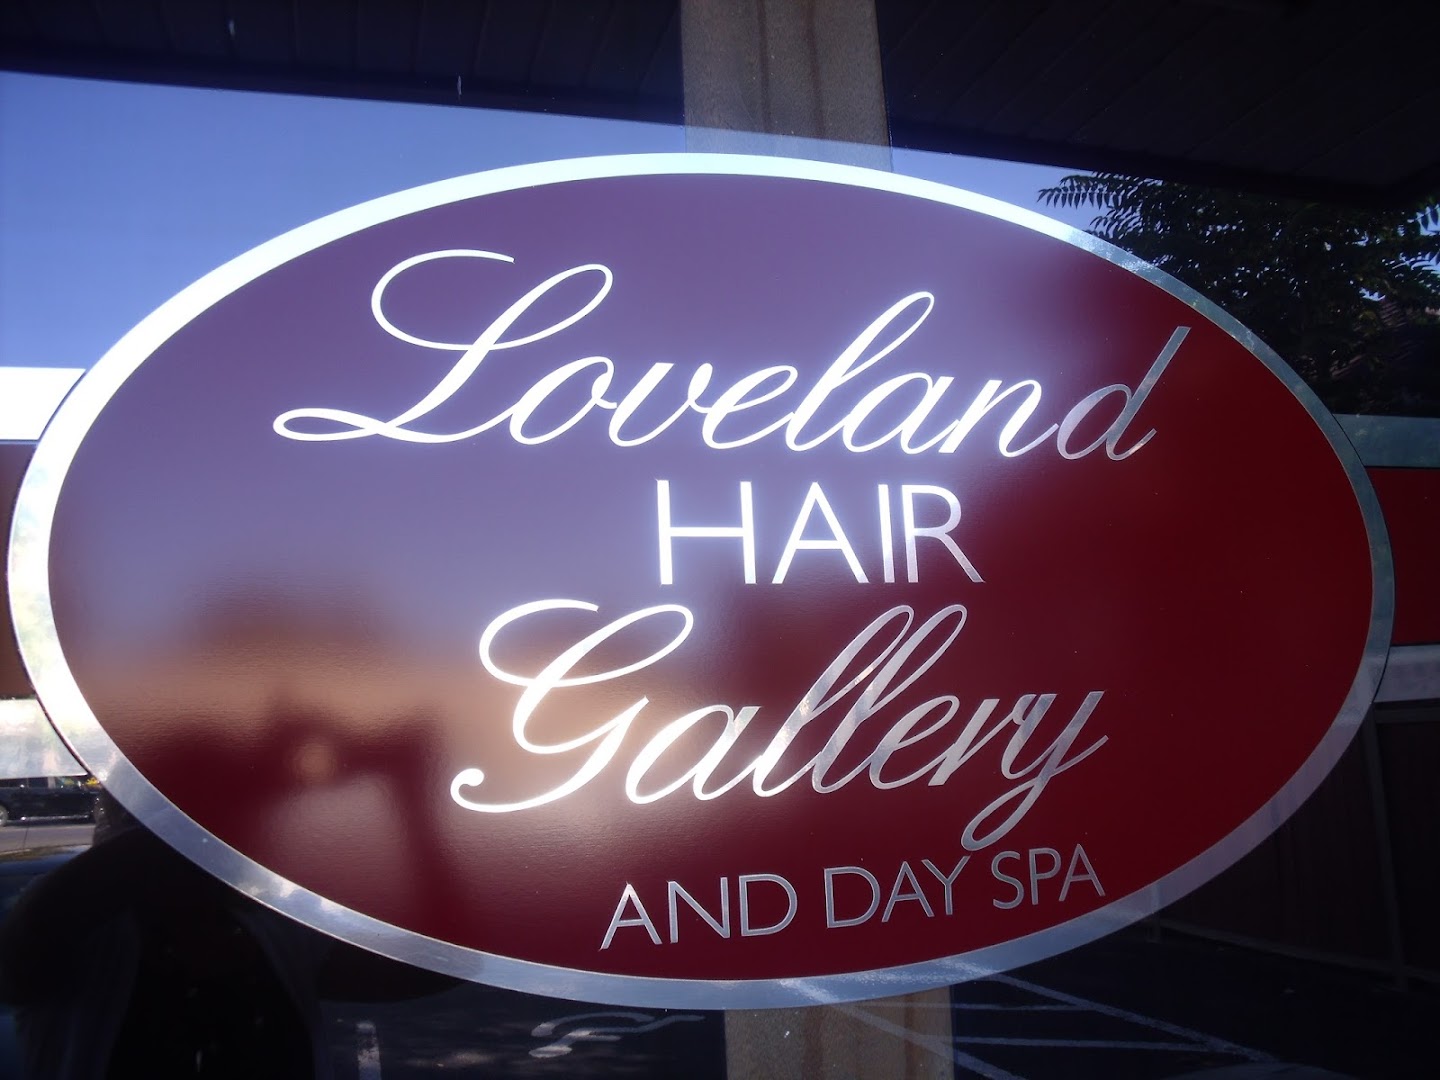 Loveland Hair Gallery and Day Spa